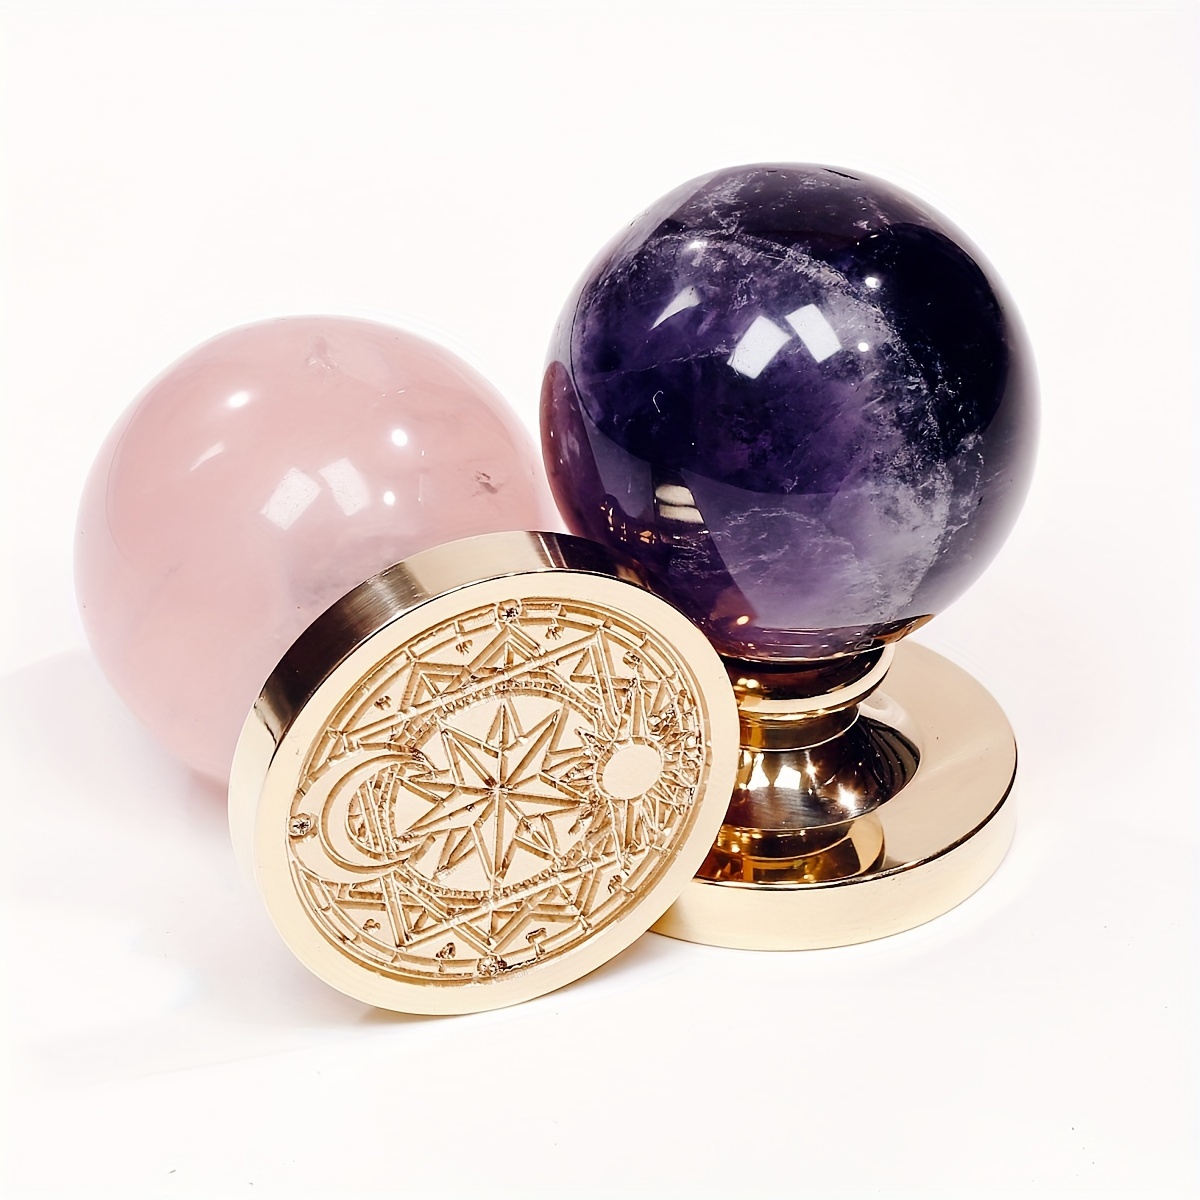 

1pc Natural Rose Quartz And Amethyst Crystal Ball Magic Wax Seal Stamp, Massage Ball Stamp, Wax Seal Stamp, Gift Stamp, Envelope Invitation Stamp